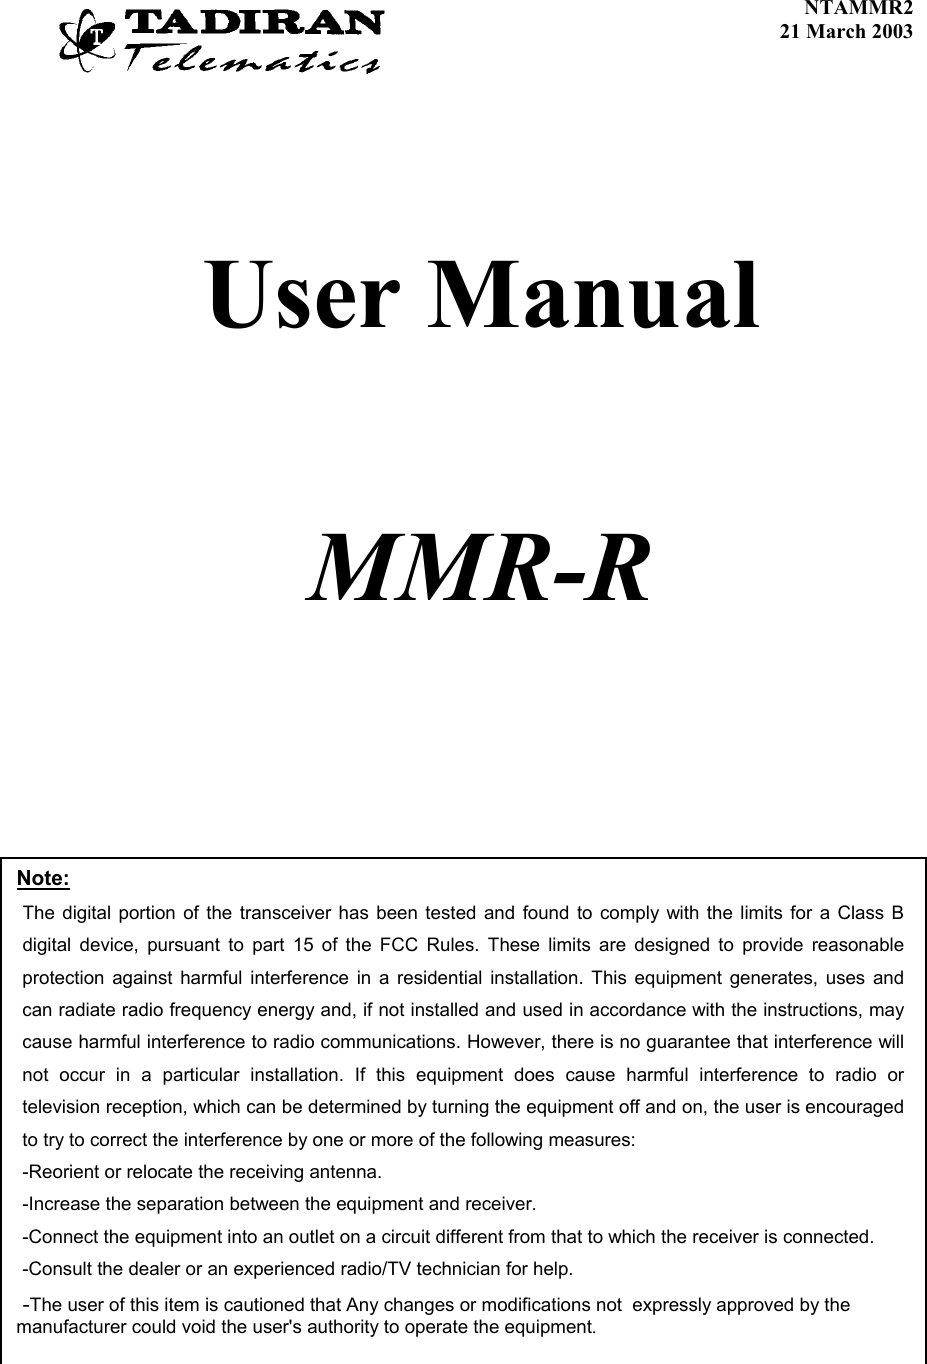    NTAMMR2               21 March 2003     User Manual     MMR-R    Note: The digital portion of the transceiver has been tested and found to comply with the limits for a Class B digital device, pursuant to part 15 of the FCC Rules. These limits are designed to provide reasonable protection against harmful interference in a residential installation. This equipment generates, uses and can radiate radio frequency energy and, if not installed and used in accordance with the instructions, may cause harmful interference to radio communications. However, there is no guarantee that interference will not occur in a particular installation. If this equipment does cause harmful interference to radio or television reception, which can be determined by turning the equipment off and on, the user is encouraged to try to correct the interference by one or more of the following measures:  -Reorient or relocate the receiving antenna. -Increase the separation between the equipment and receiver. -Connect the equipment into an outlet on a circuit different from that to which the receiver is connected. -Consult the dealer or an experienced radio/TV technician for help.  -The user of this item is cautioned that Any changes or modifications not  expressly approved by the       manufacturer could void the user&apos;s authority to operate the equipment.  